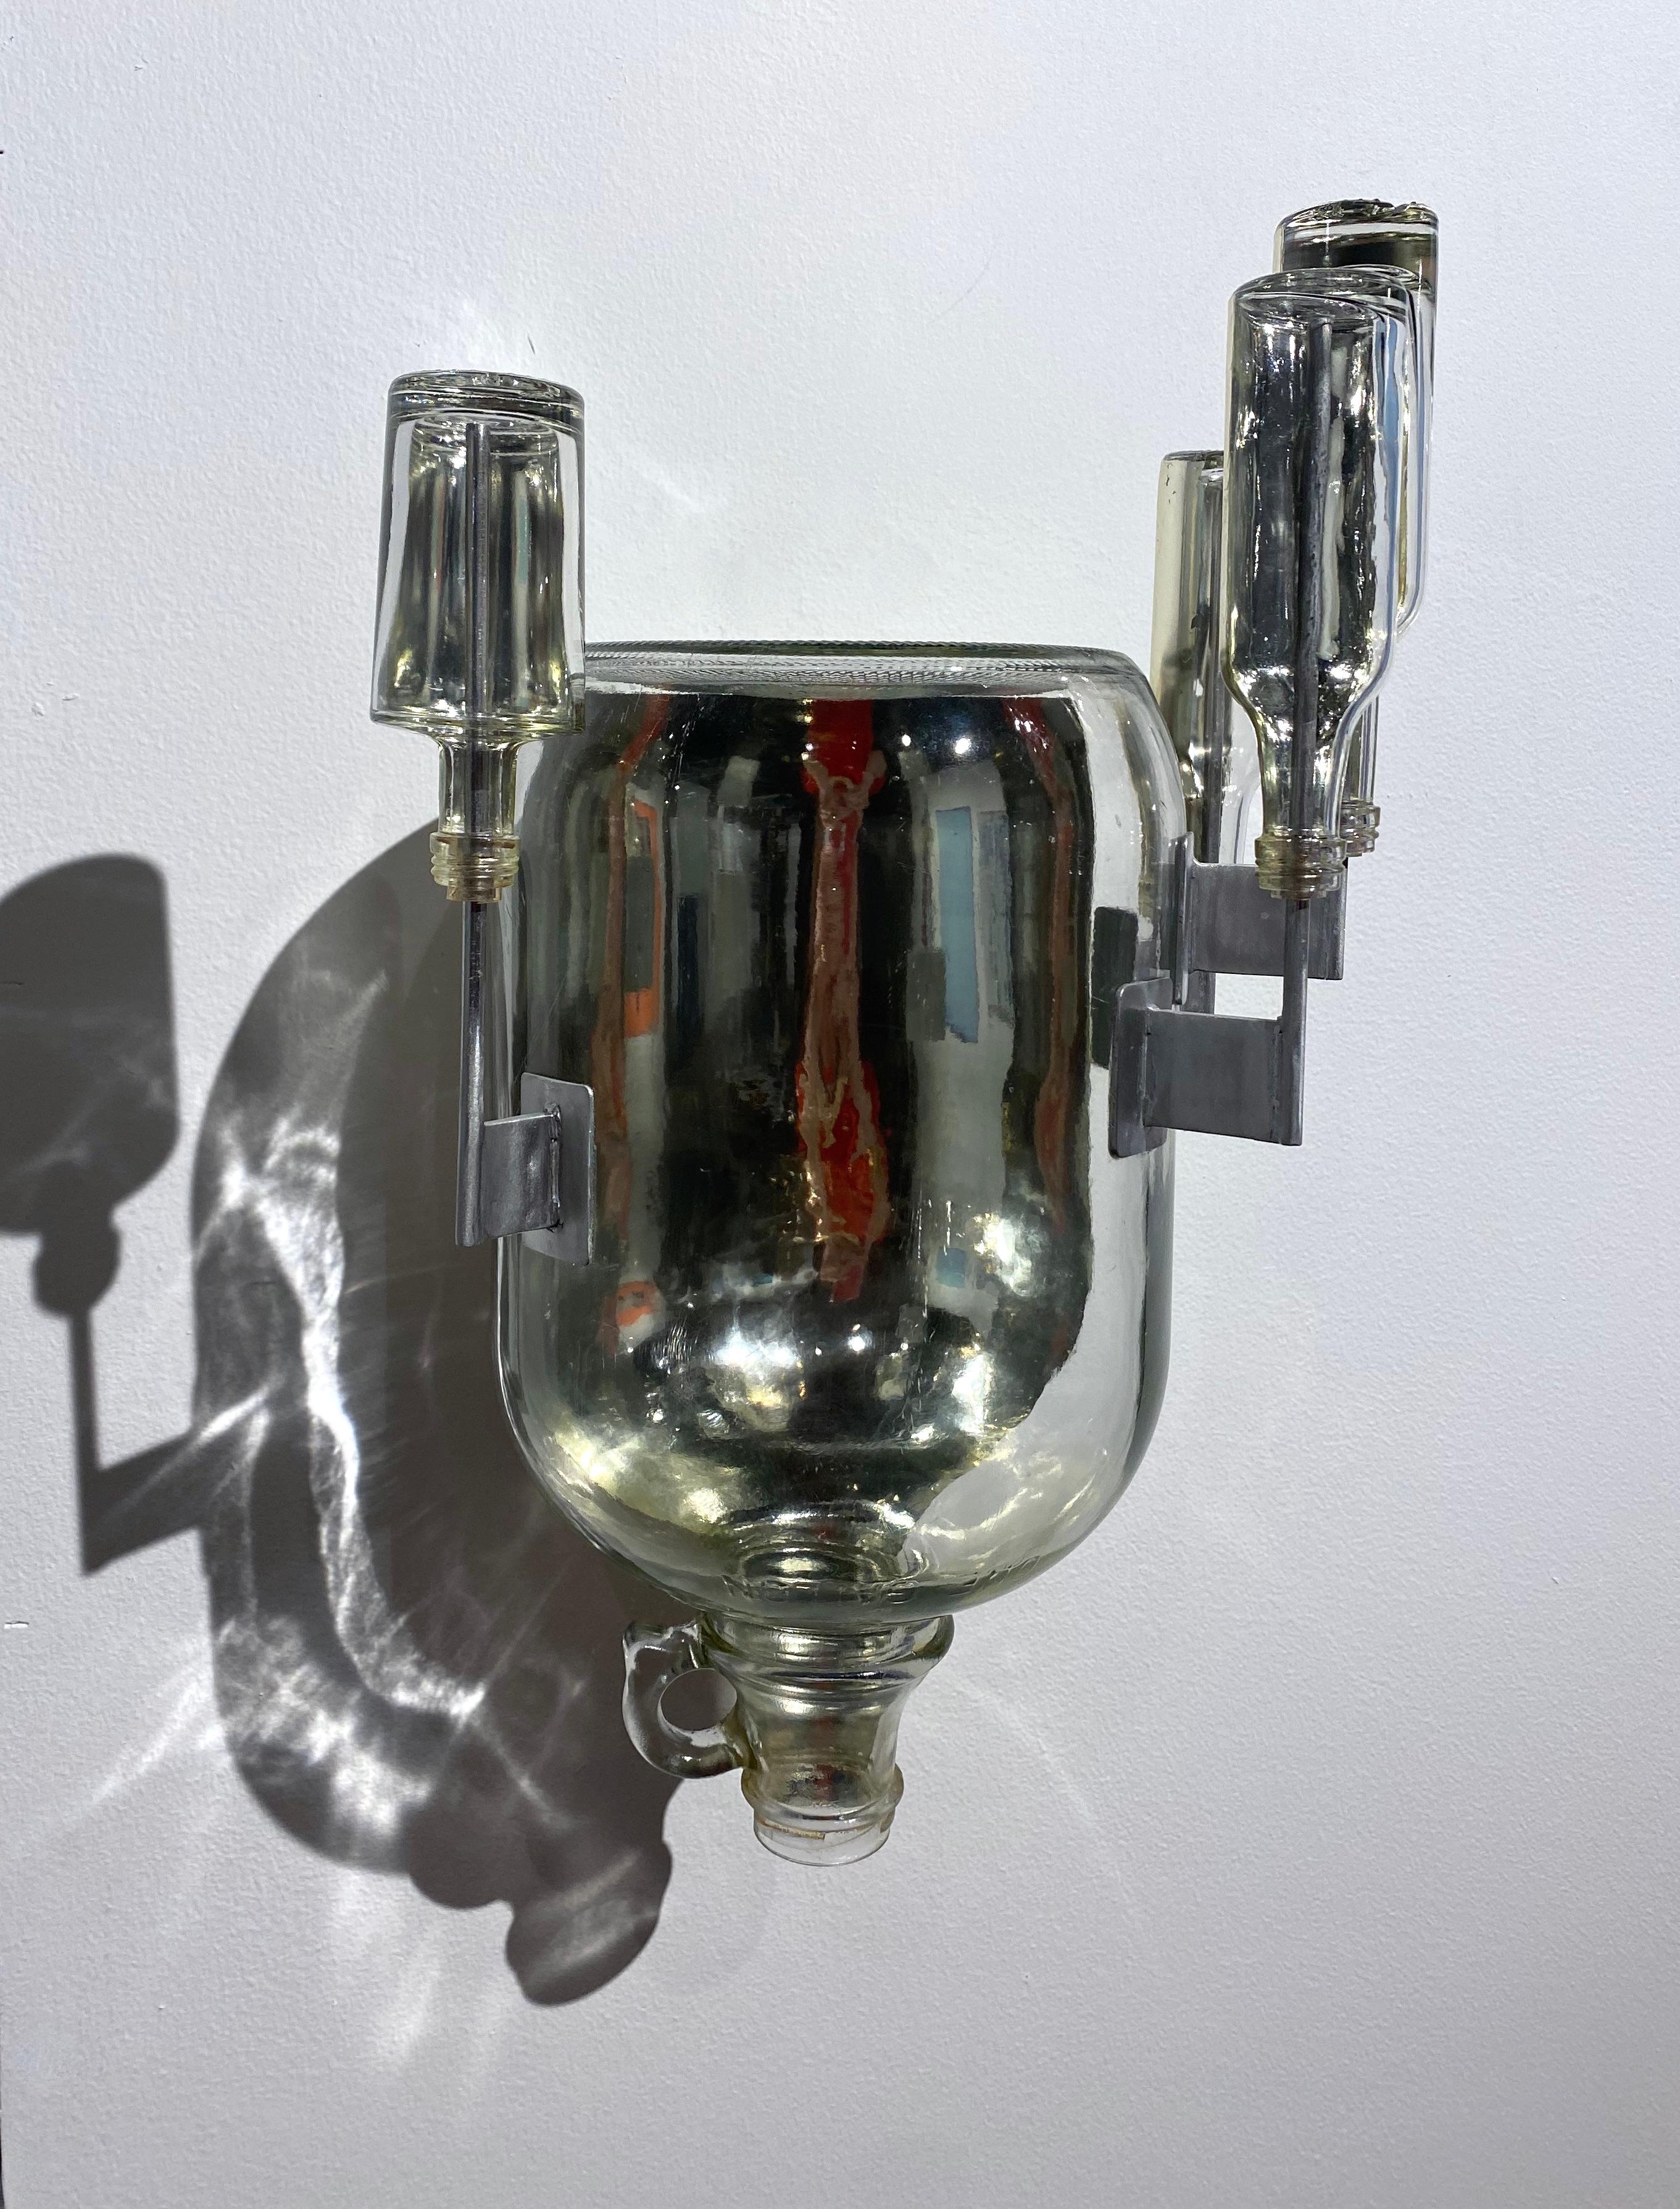 In this wall-mounted sculpture, glass bottles and a round, cylindrical jug are mirrored with white gold leaf on half the inside, creating a reflective inner side visible through the clear front.

Richard Klein has utilized found objects in his